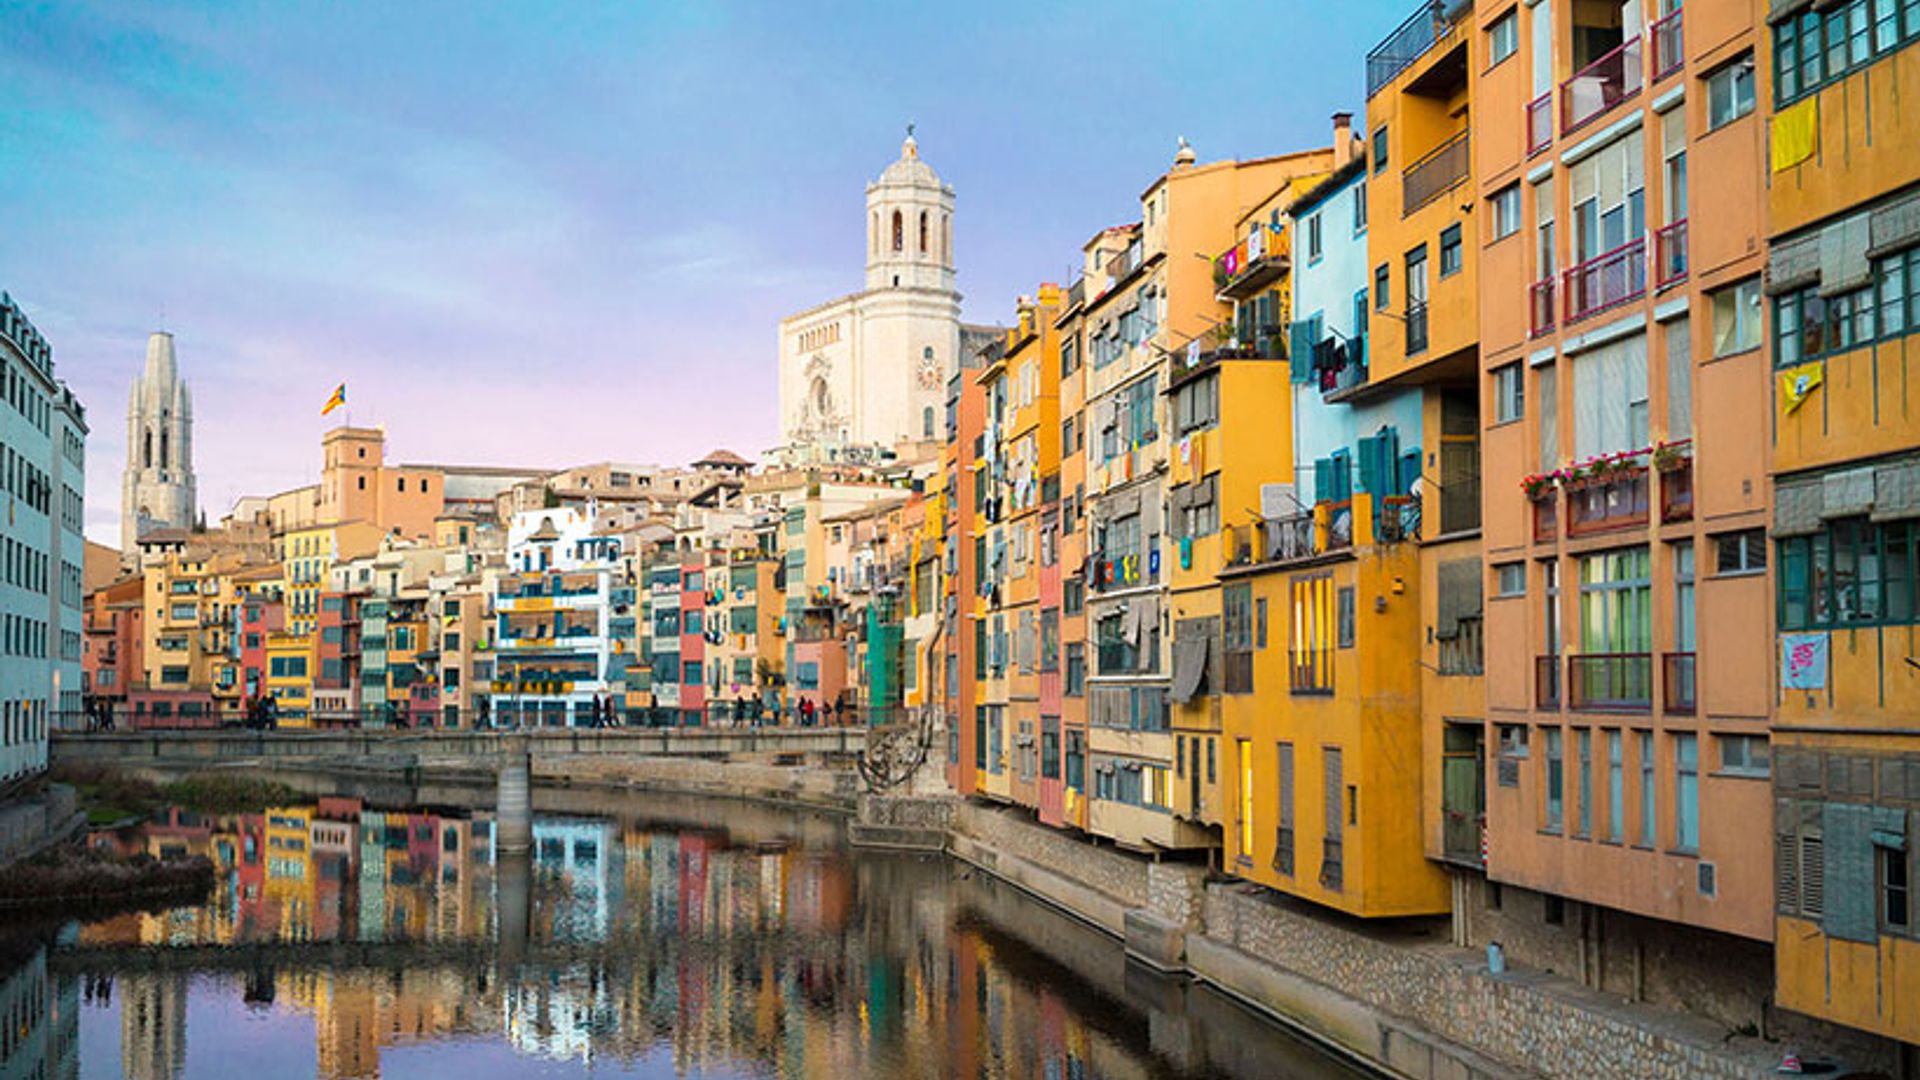 Girona's famous houses and cathedral